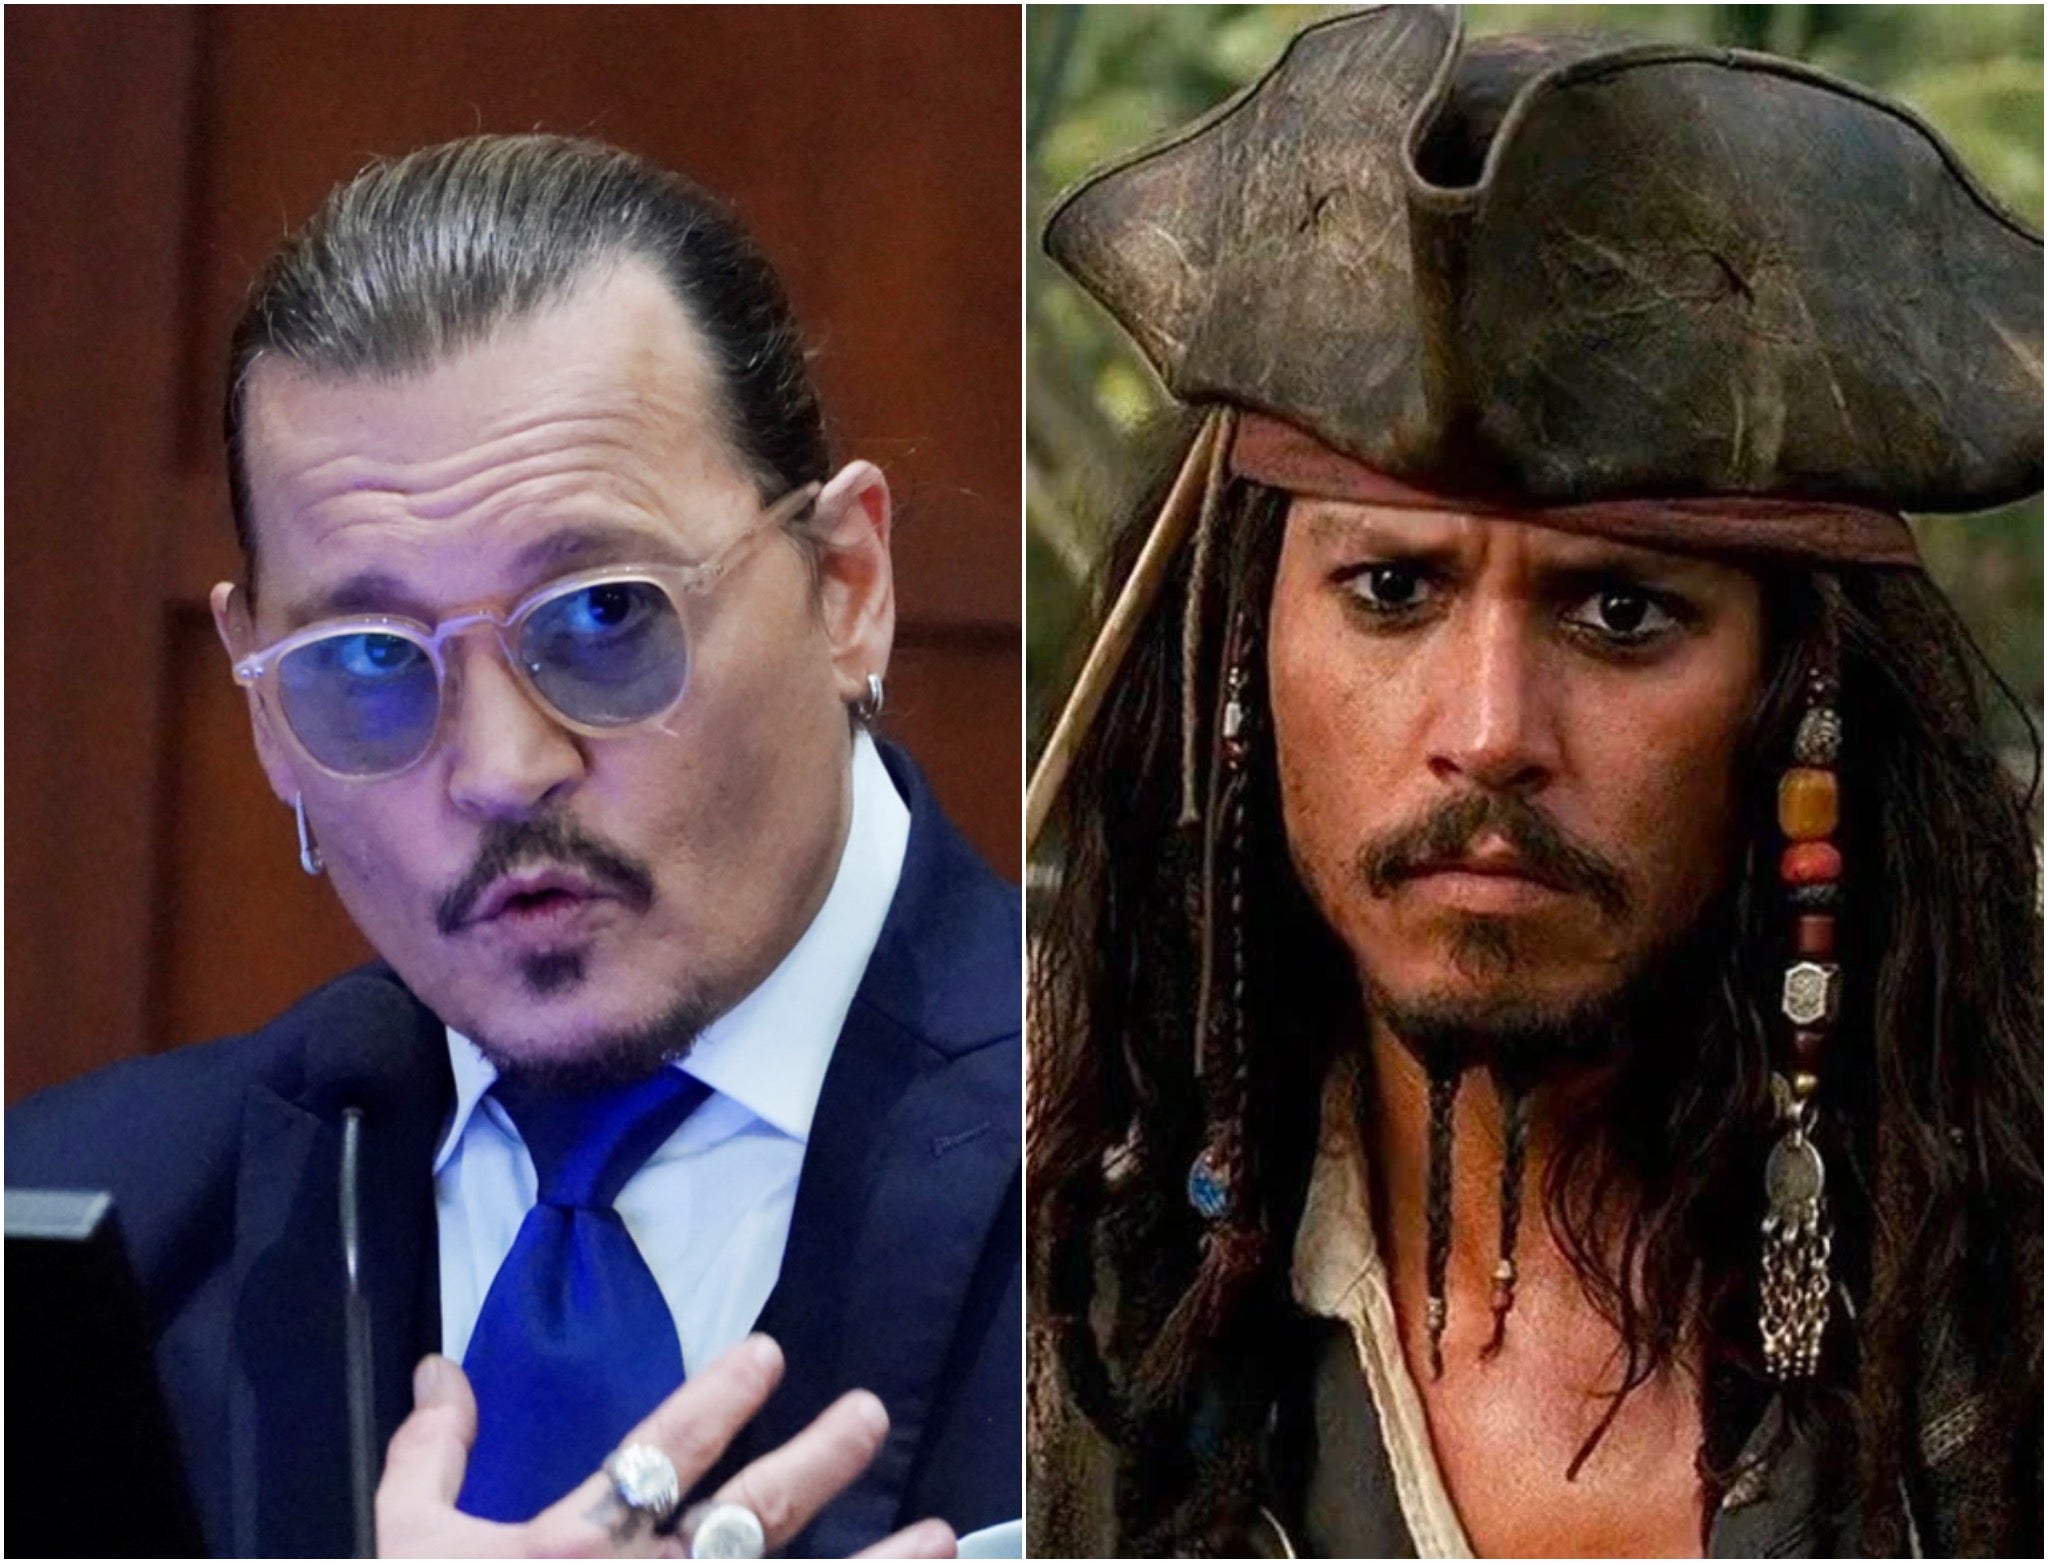 Johnny Depp plays Captain Jack Sparrow in the Pirates of the Caribbean franchise